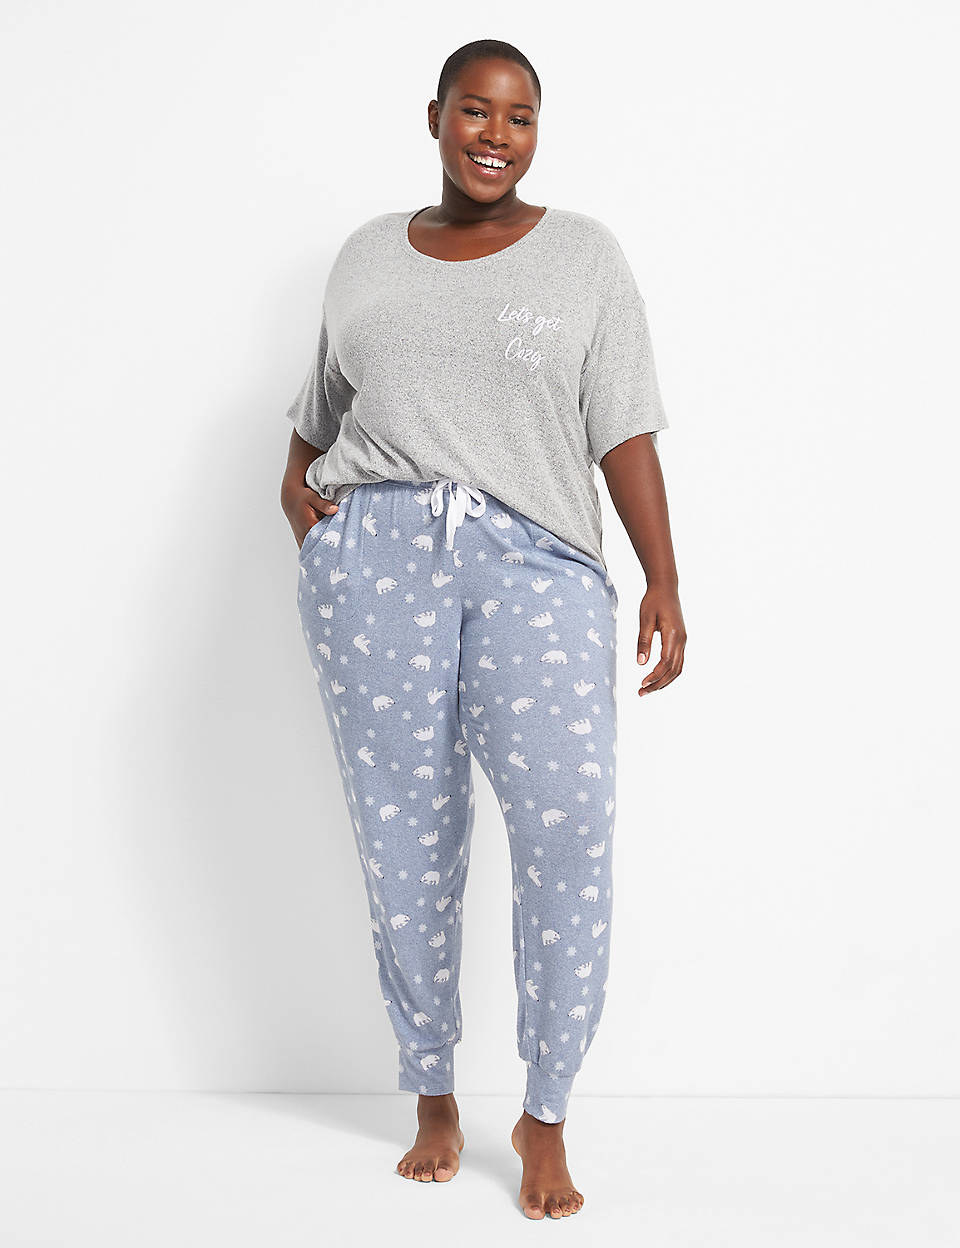 Model is wearing a grey top that says &quot;let&#x27;s get cozy&quot; and pale blue pajama pants with little white polar bears and snowflakes all over it